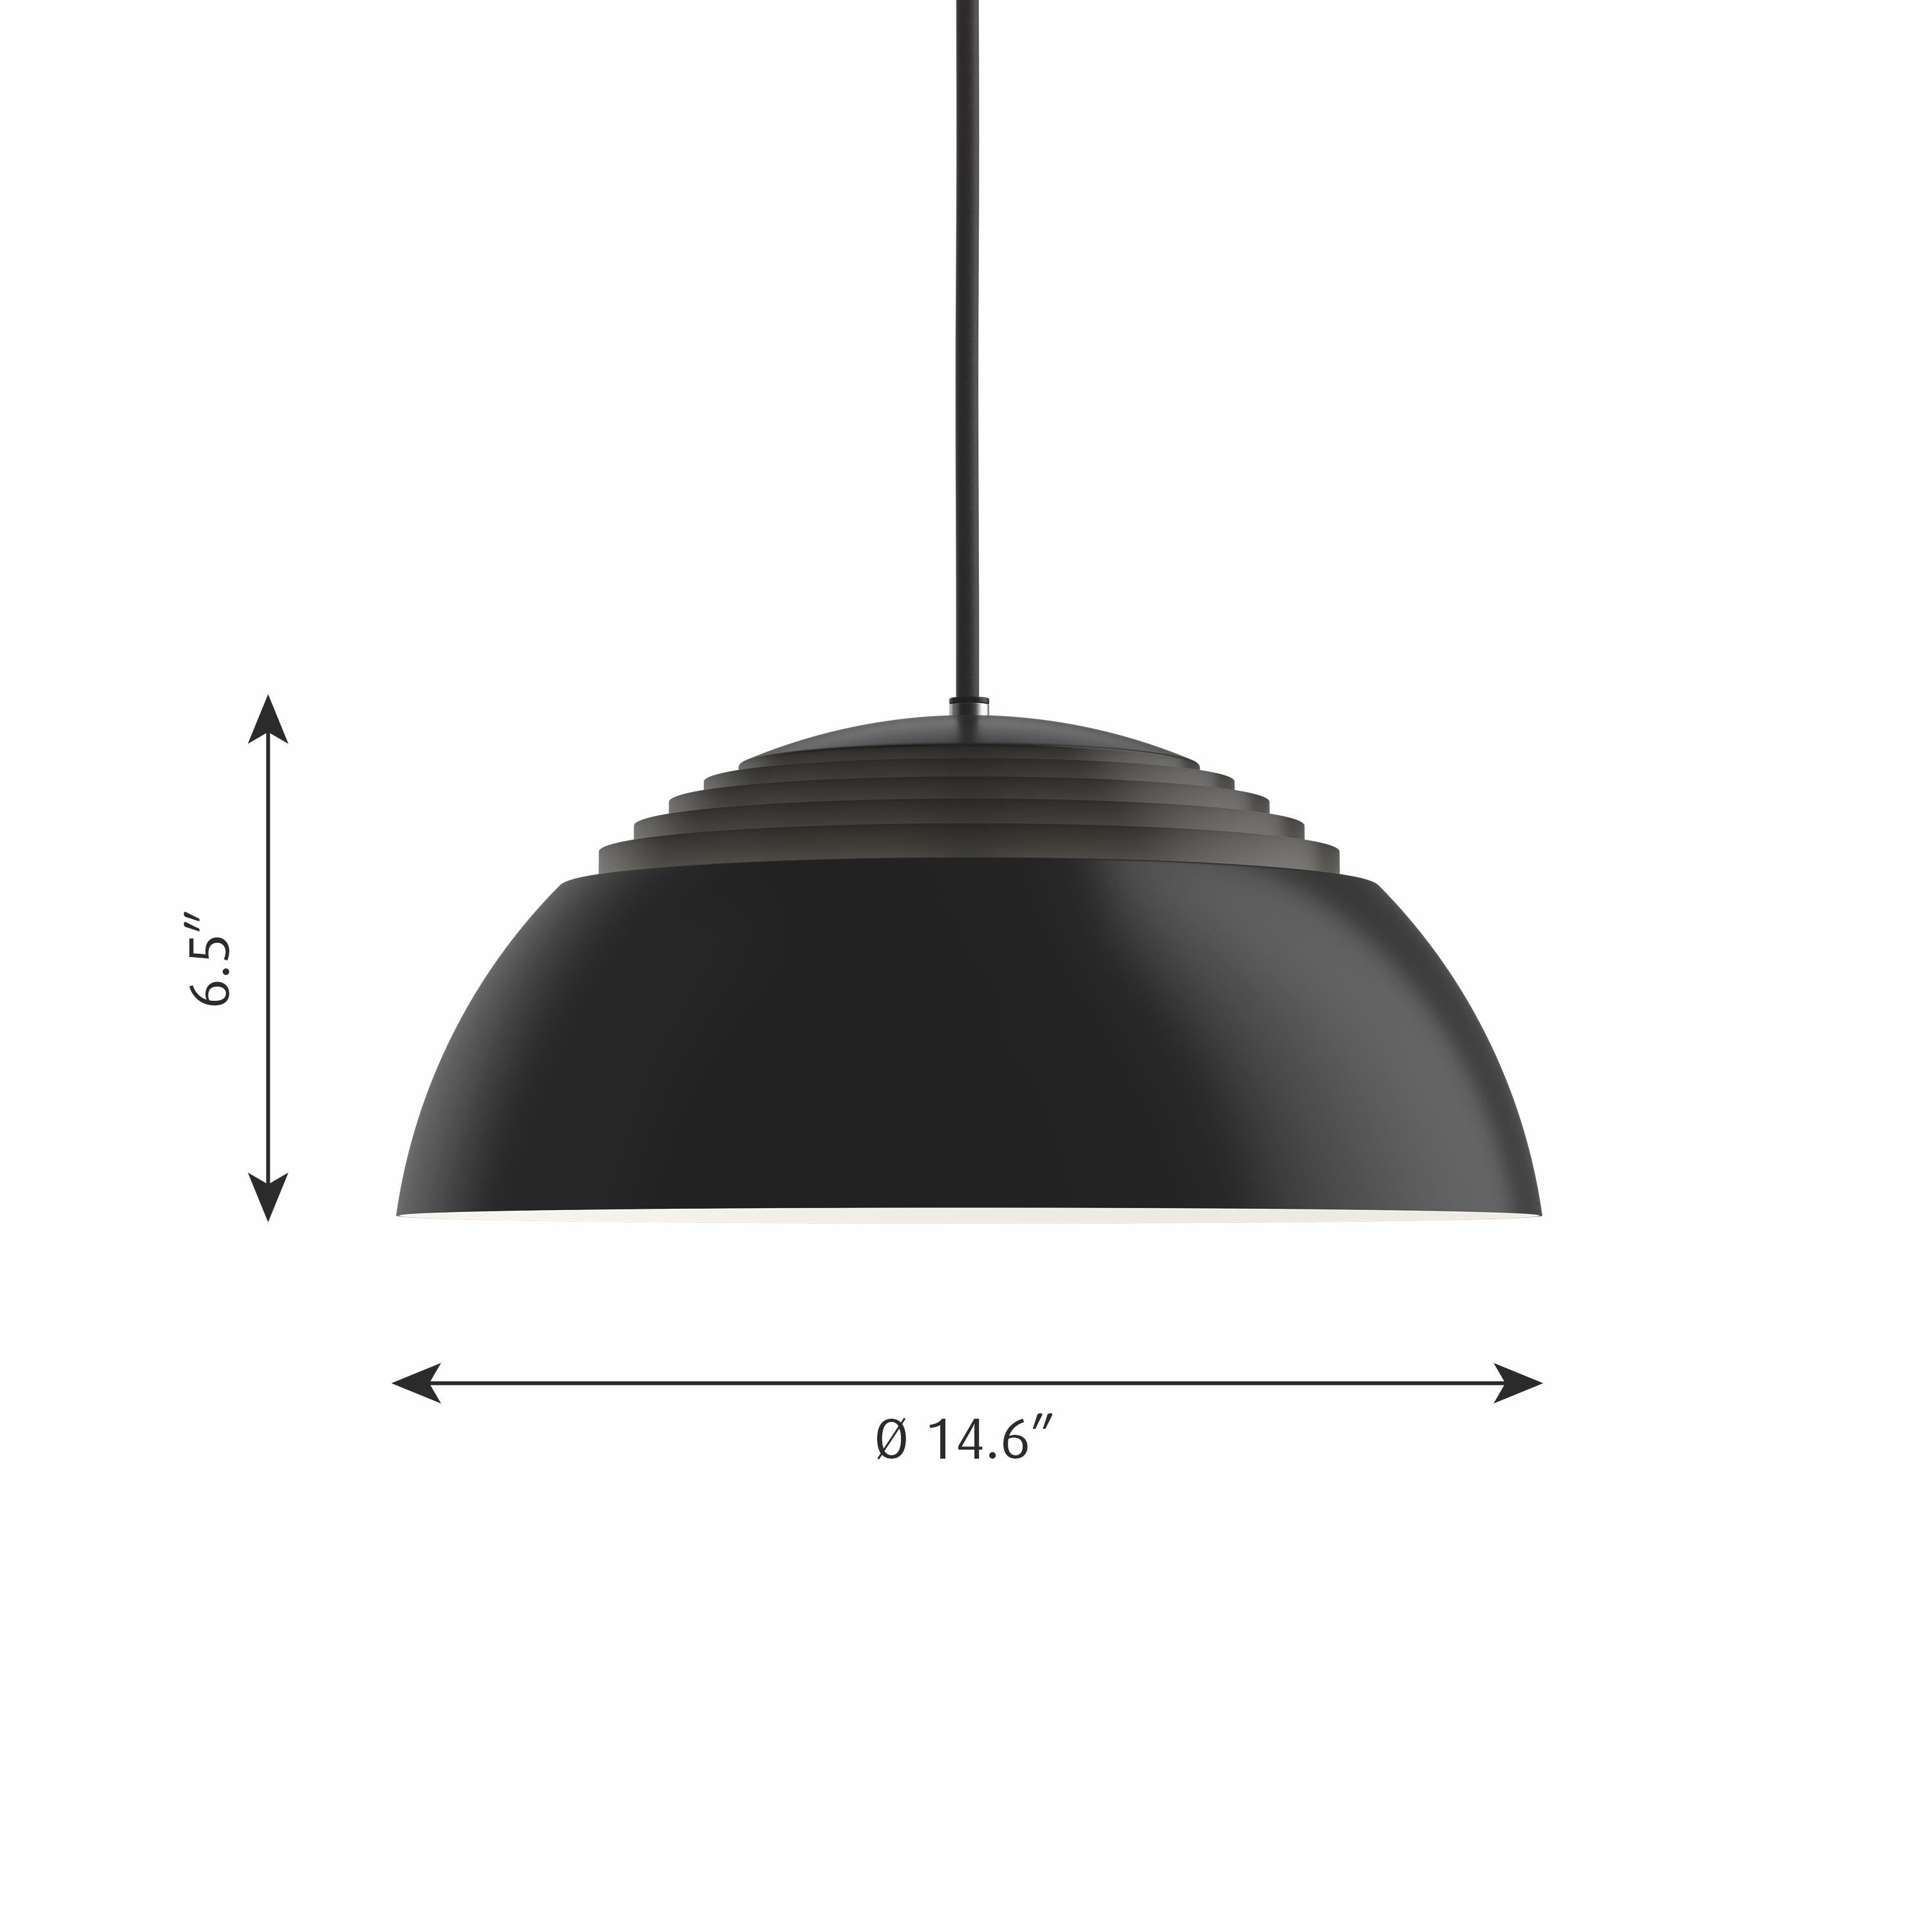 AJ Royal pendant in black by Arne Jacobsen for Louis Poulsen. Designed in 1960 by Arne Jacobsen for the SAS Royal Hotel in Copenhagen, the AJ Royal is an icon that follows Jacobsen's overall geometric shape concept. The spherical dome shape is